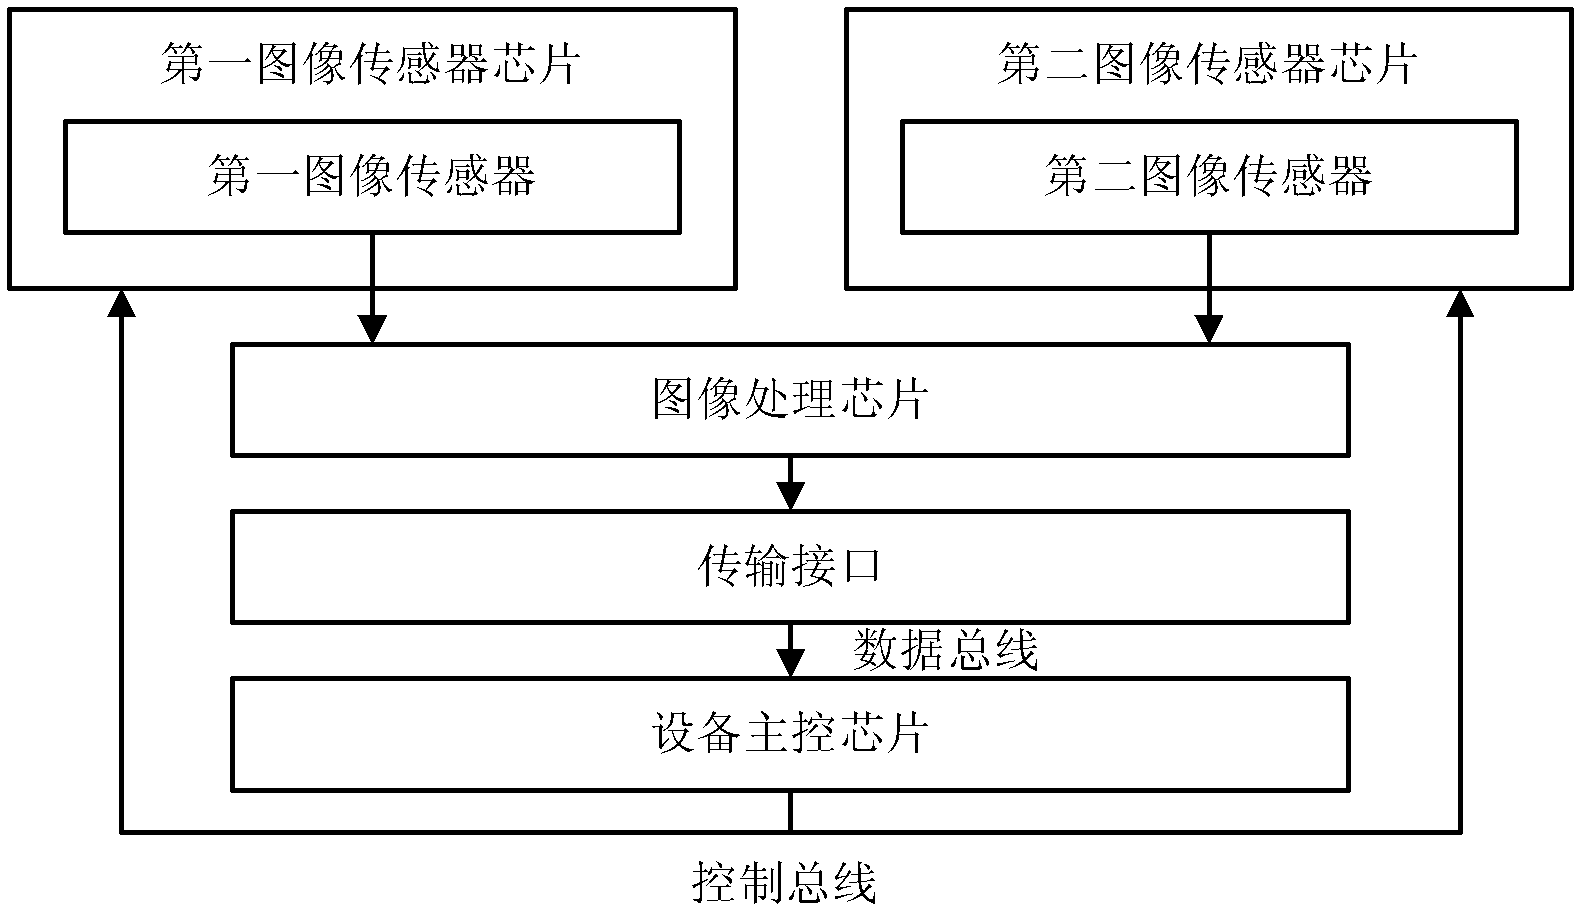 Multi-image sensor image processing device with MIPI (Mobile Industry Processor Interface) and method